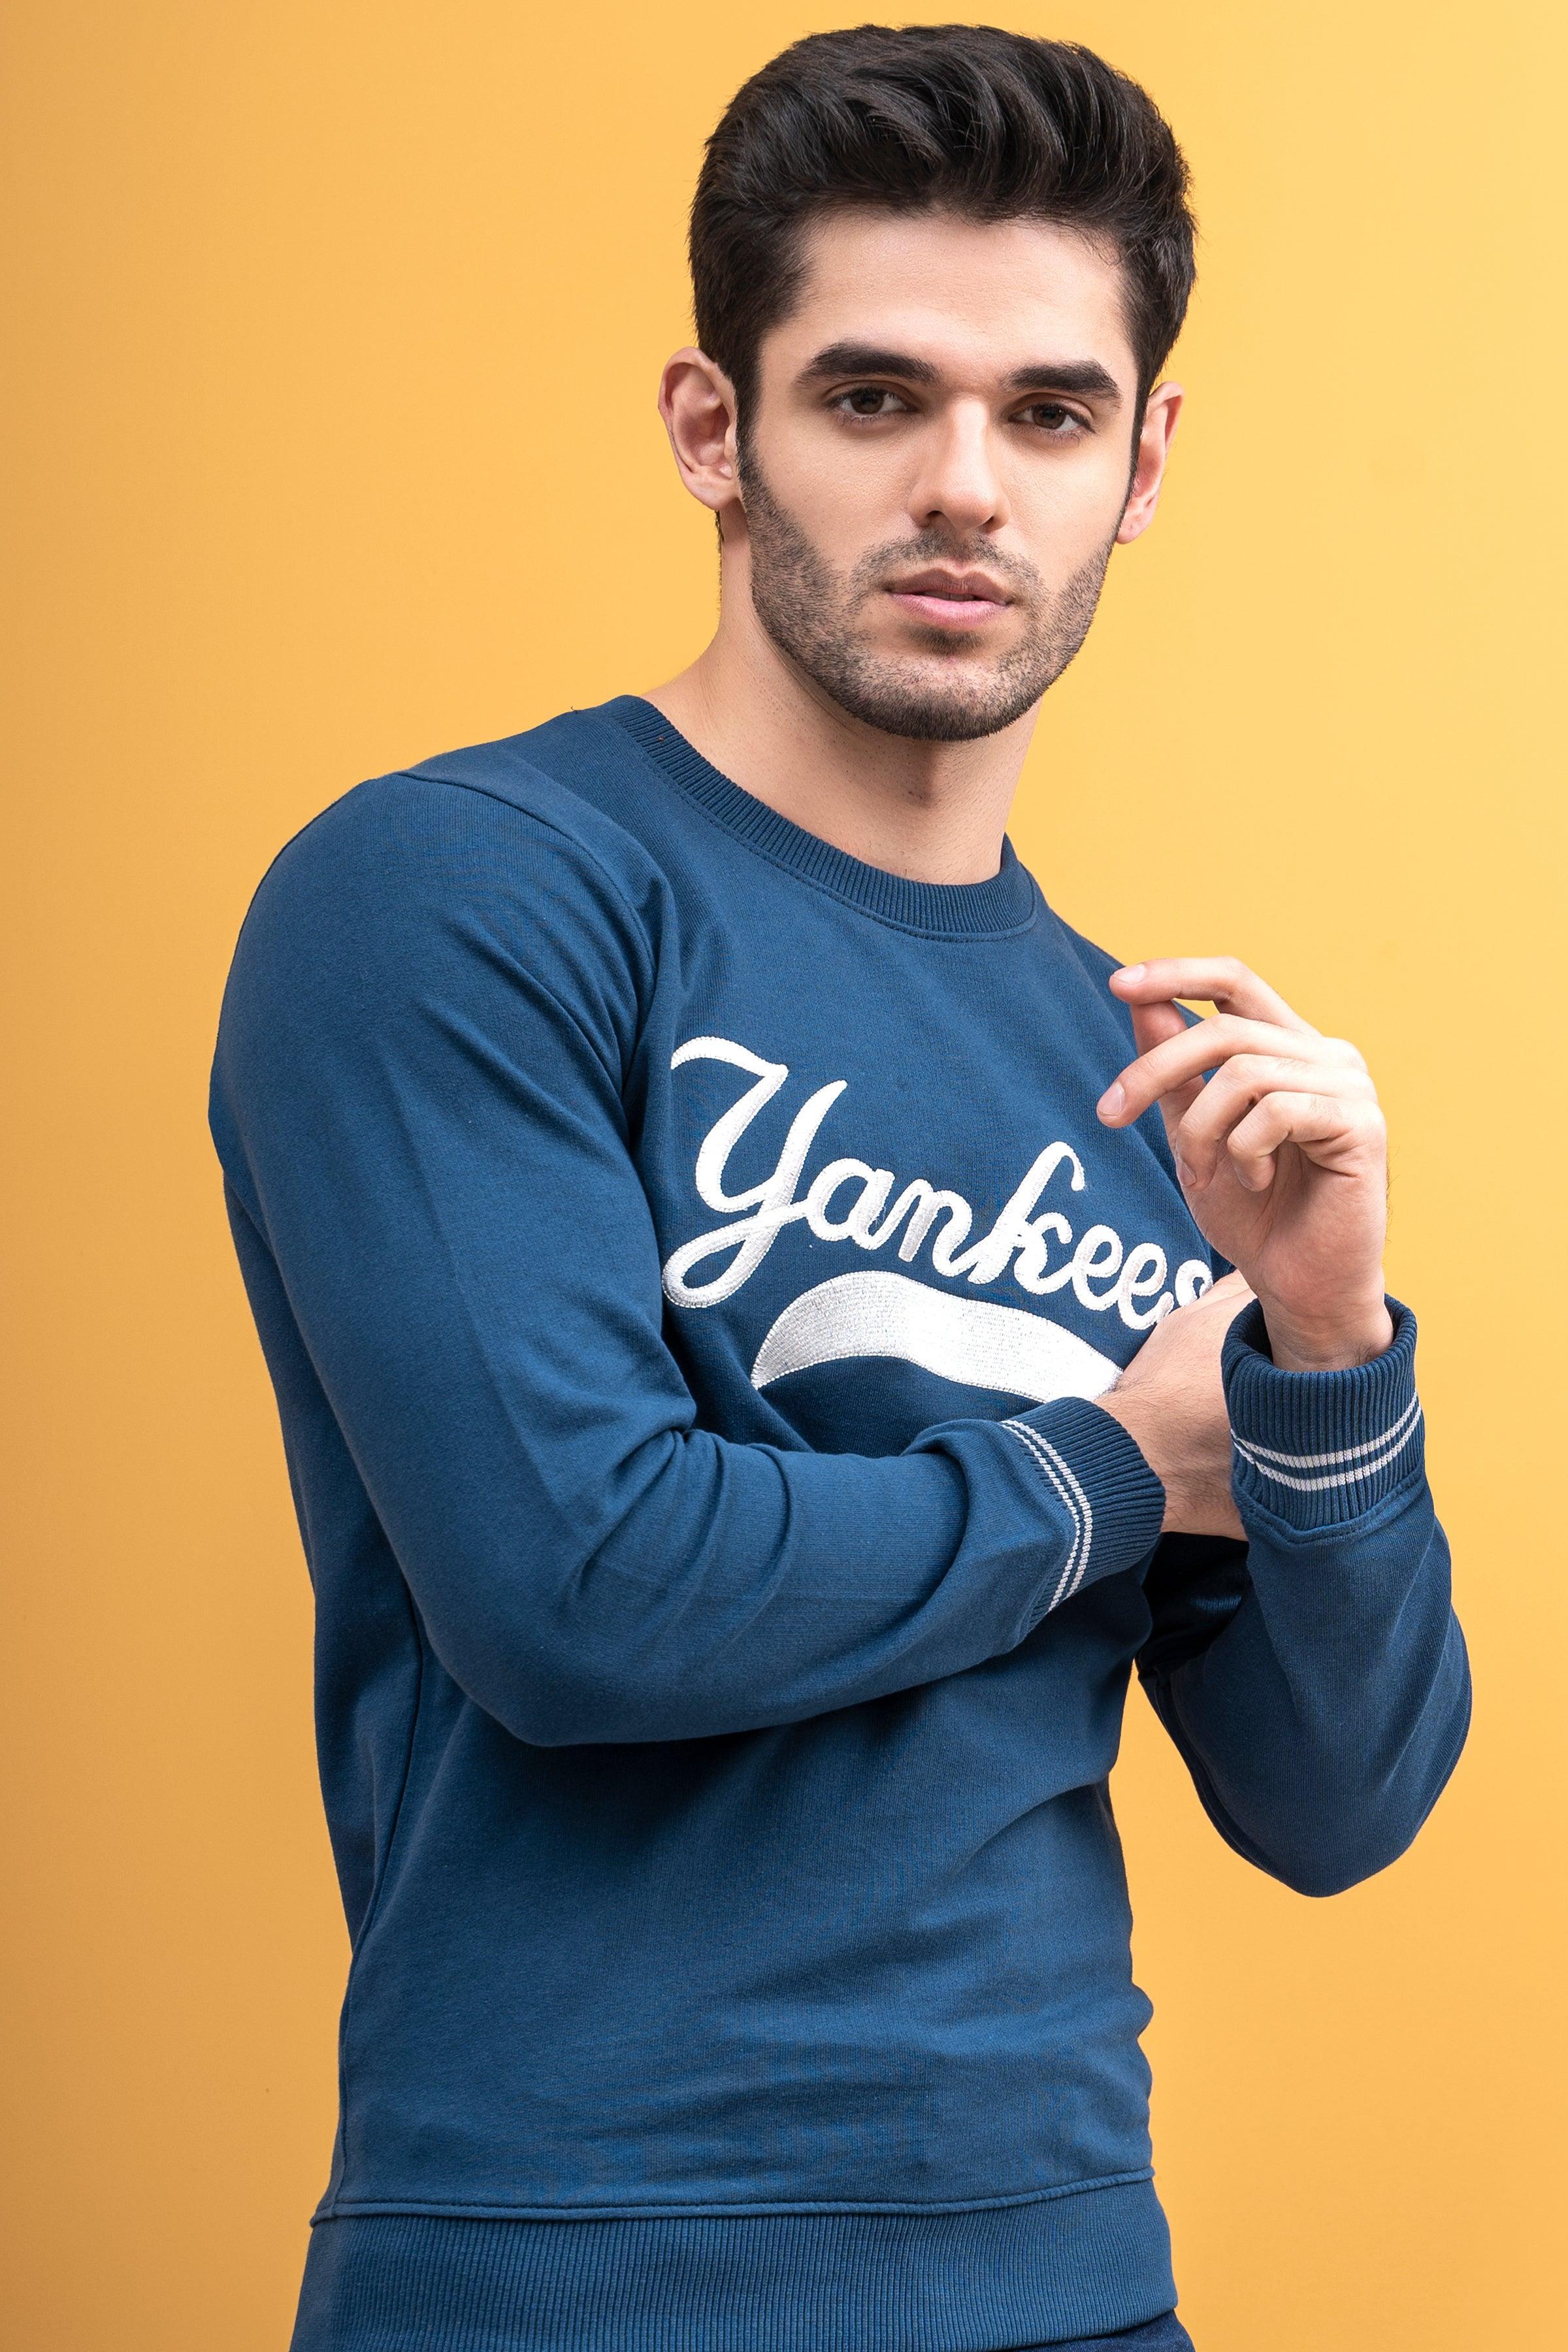 SWEAT SHIRT ROUND NECK FULL SLEEVE TEAL BLUE at Charcoal Clothing